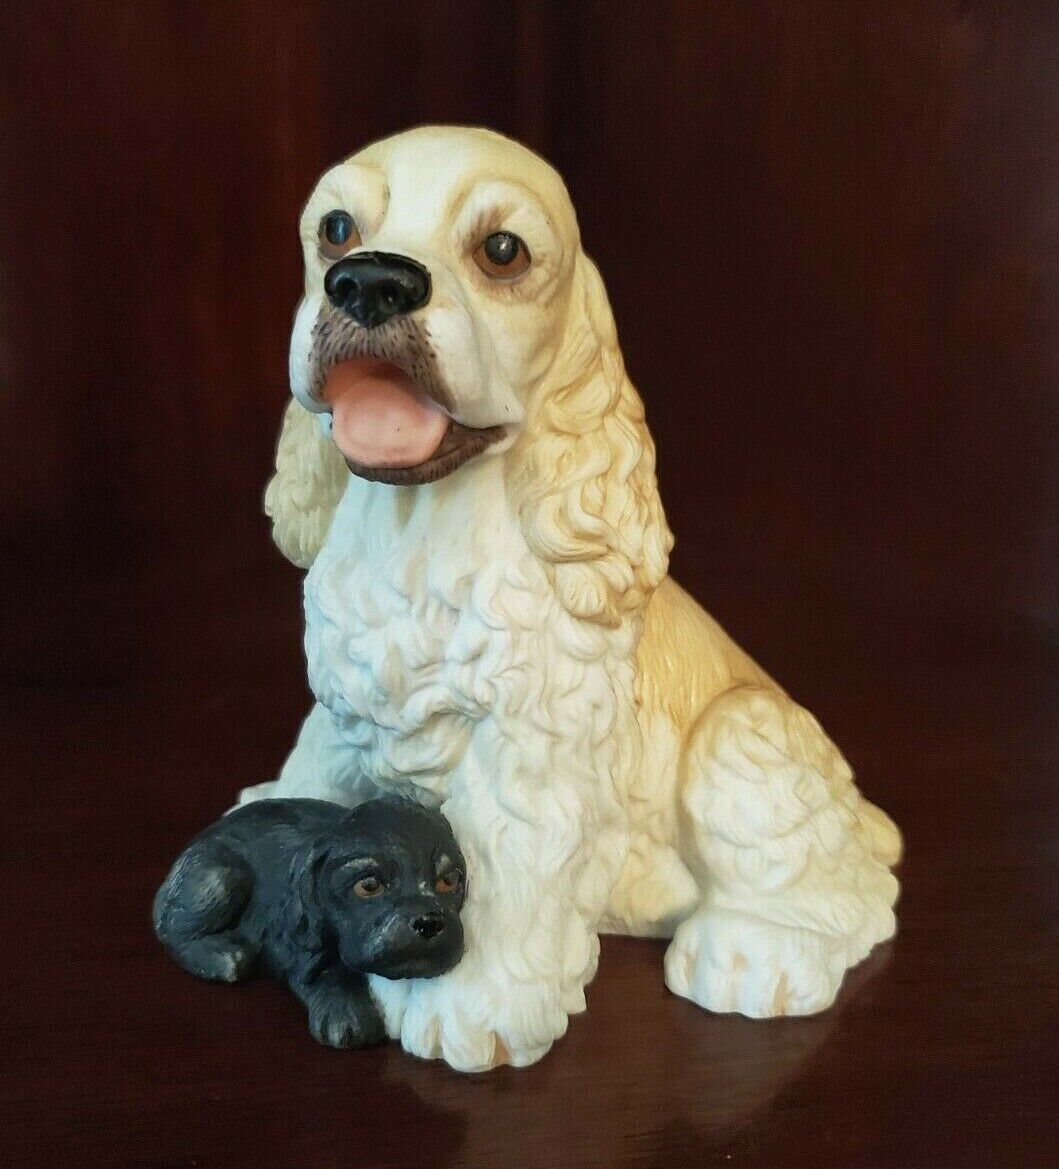 ENESCO CERAMIC PUREBRED PETS COCKER SPANIEL & PUPPY FIGURINES BY KATHY WISE